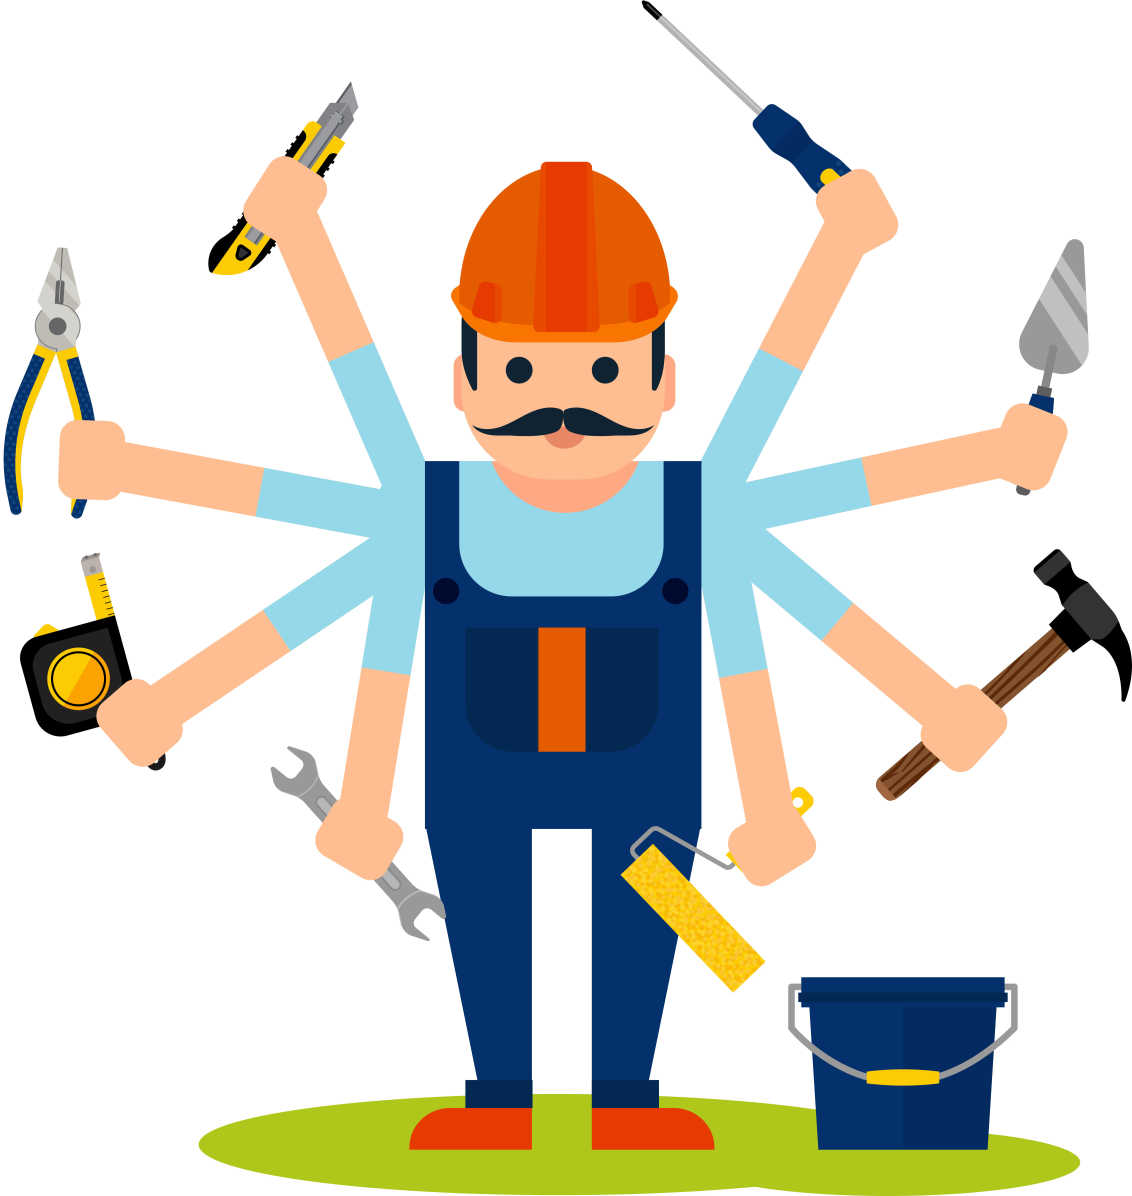 Illustration of a handy person with many different tools.